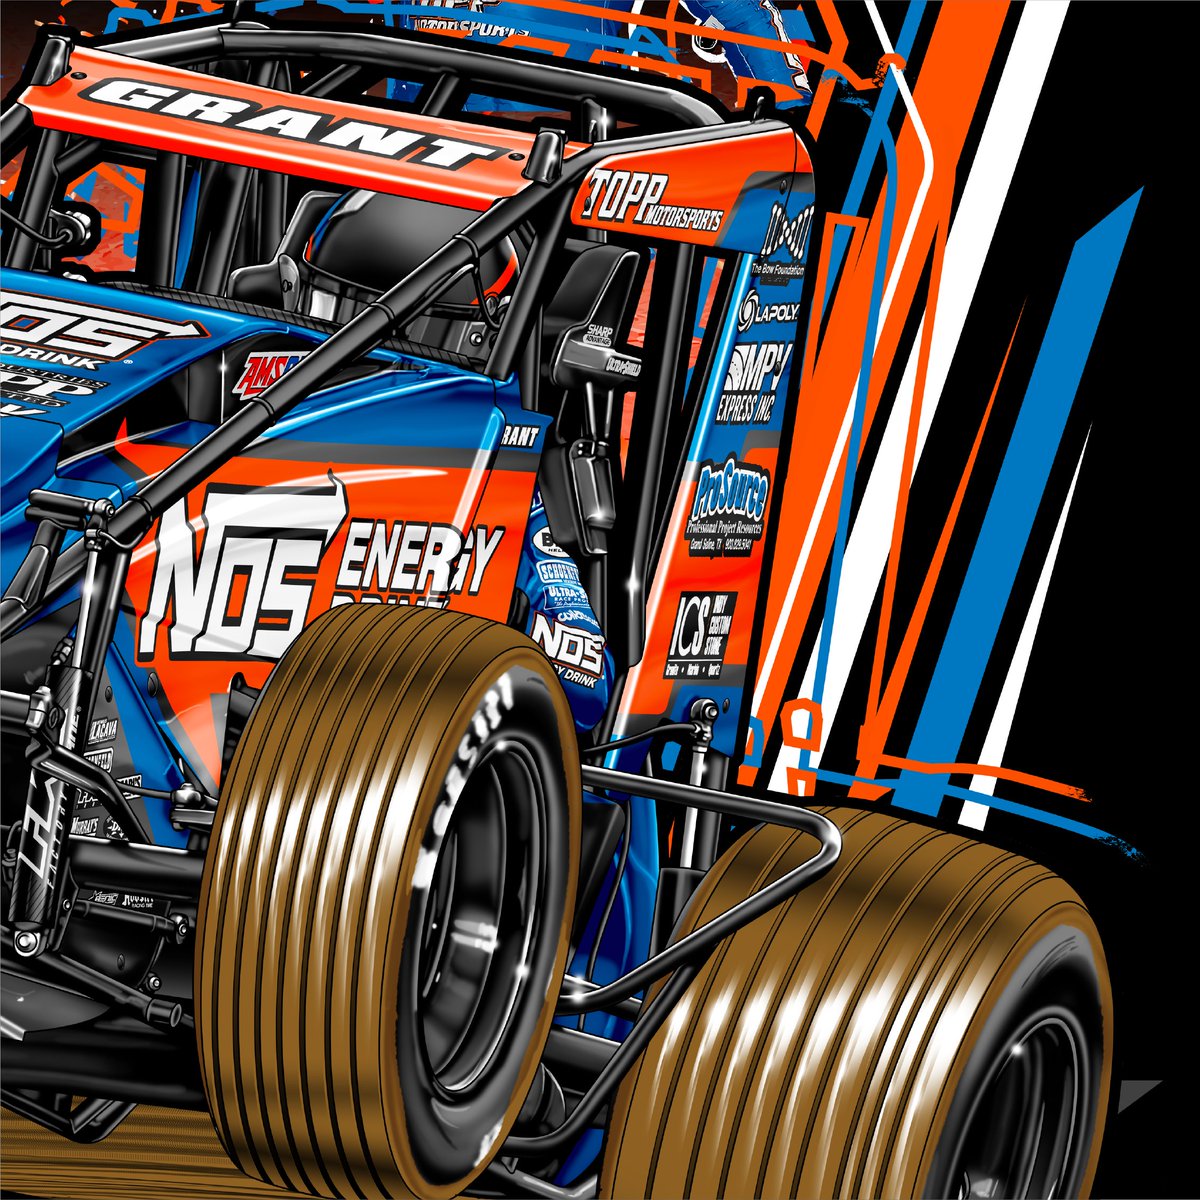 Back 2 Back USAC National Sprint Car Champion Justin Grant merch is now available. The quest for a 3 peat restarts tonight with USAC back in action at Lawrenceburg Speedway. shopjustingrant.com